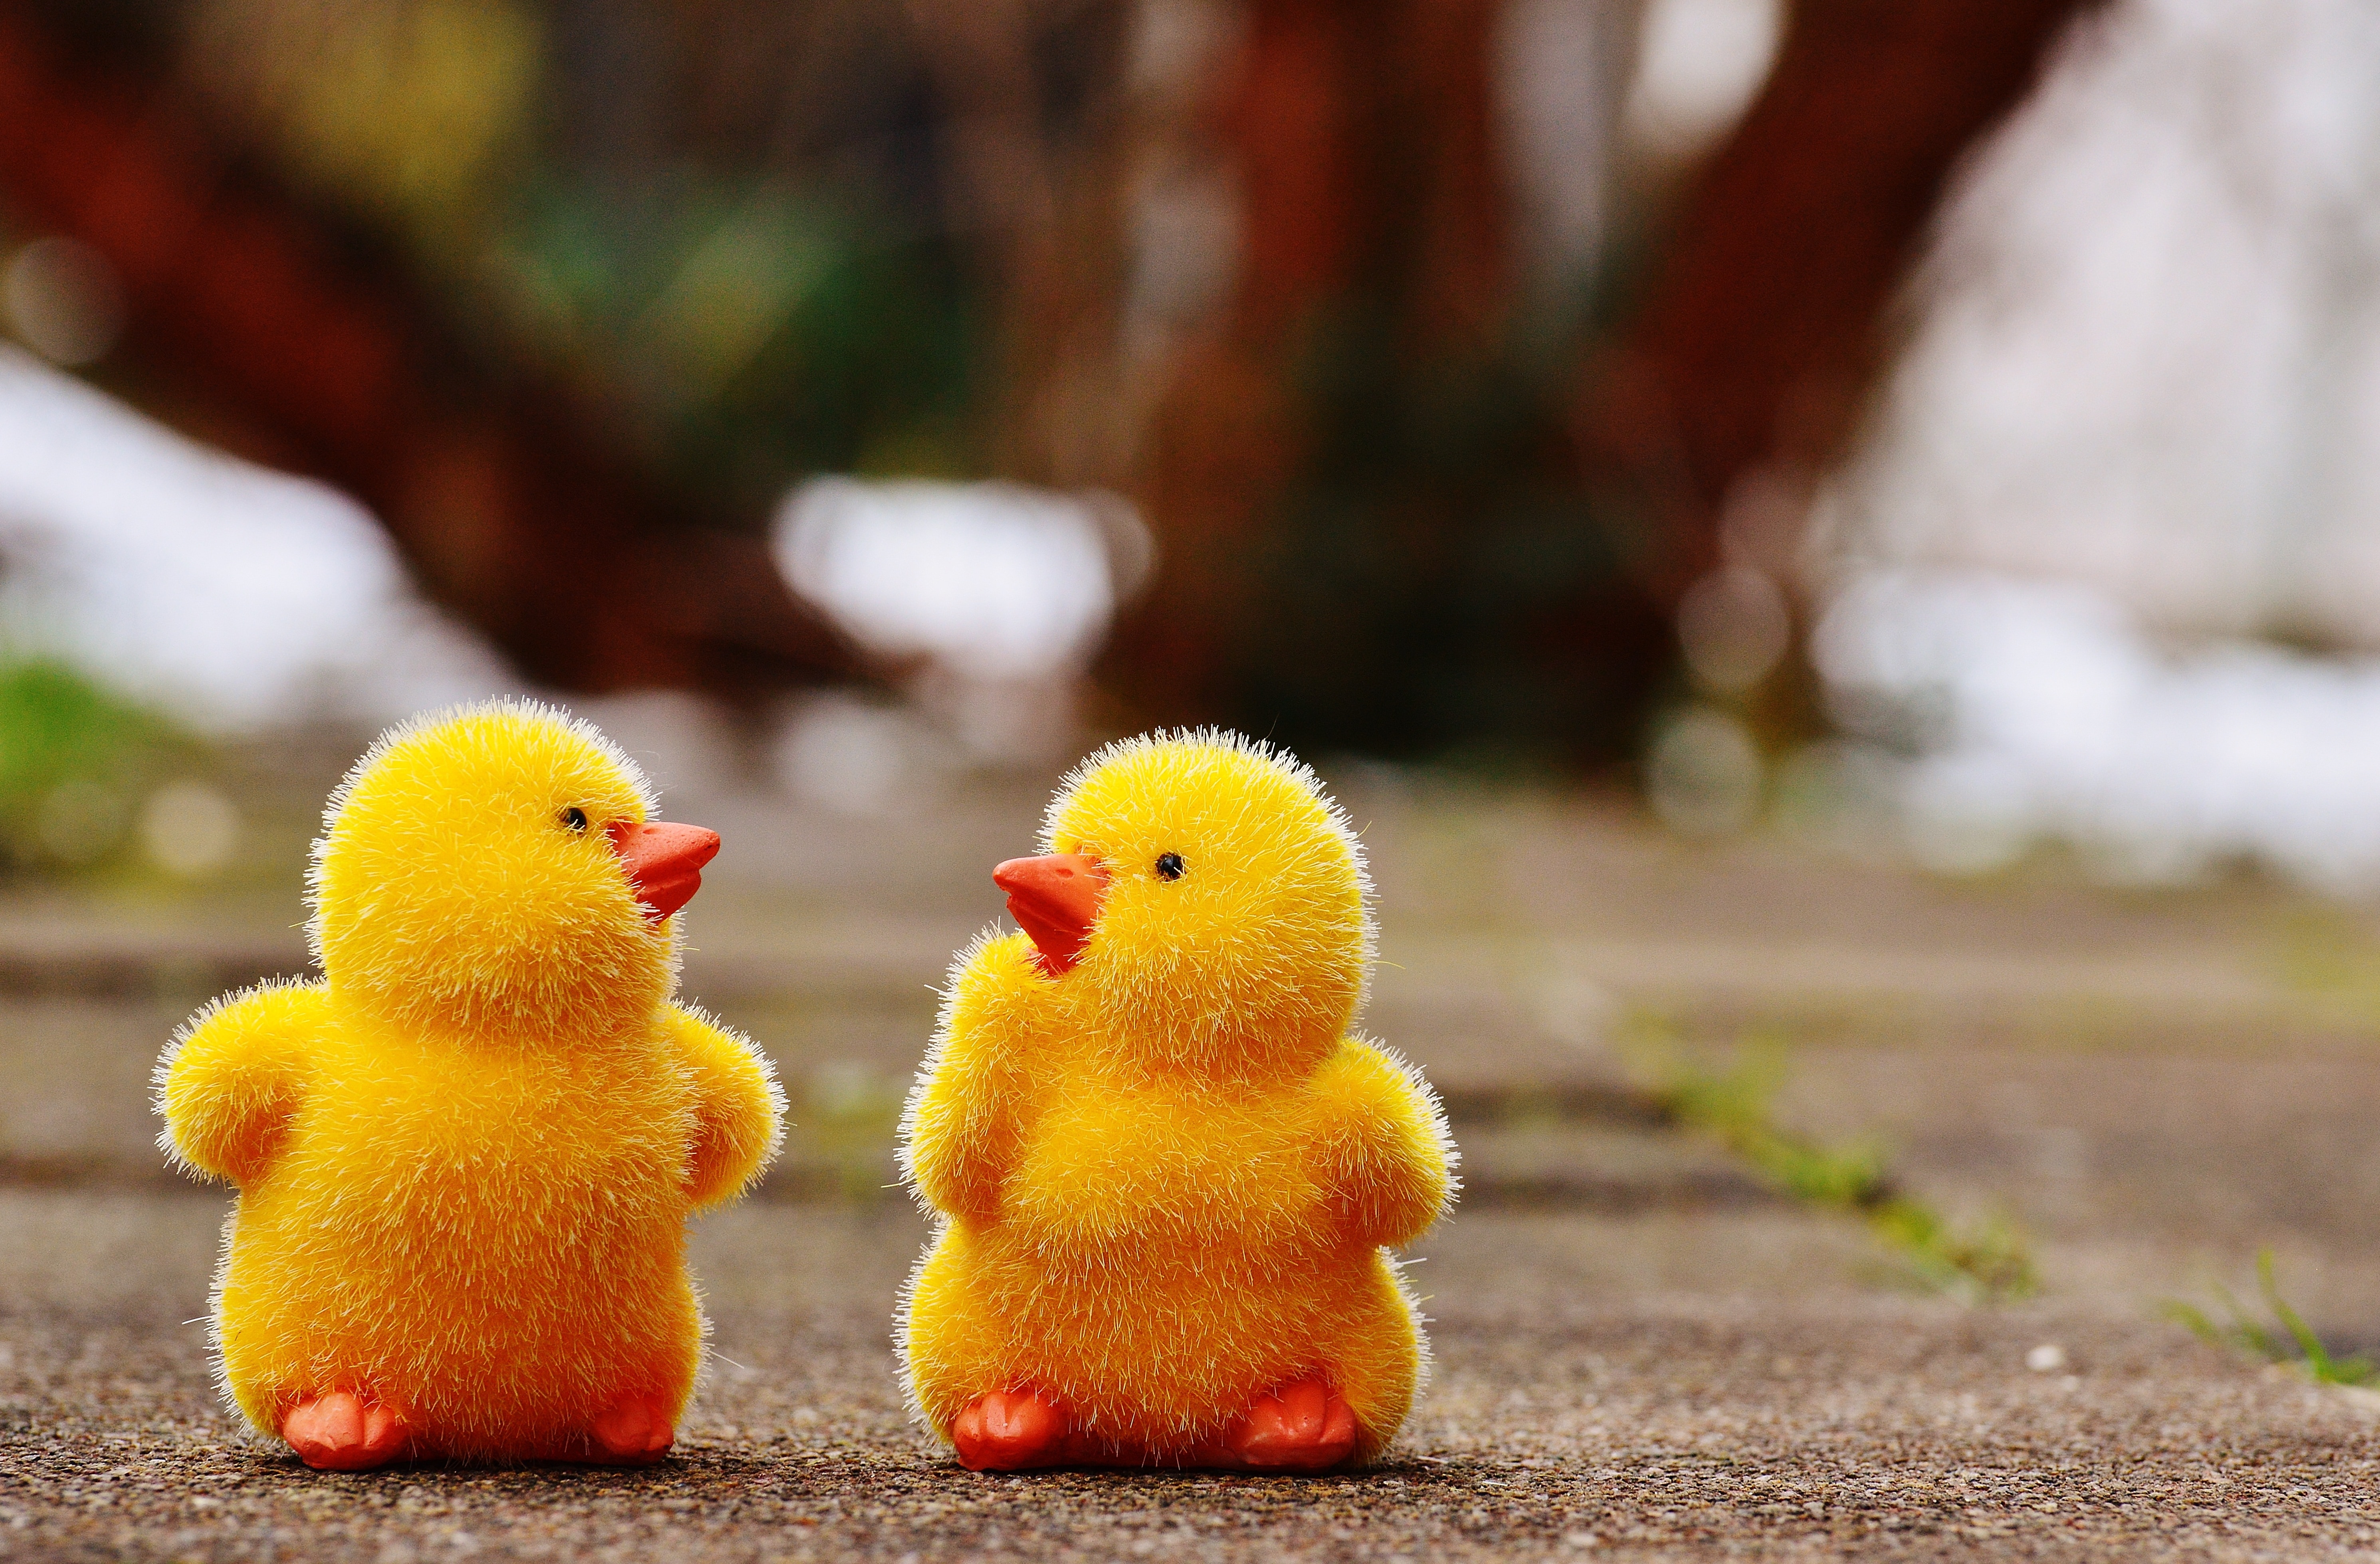 selective focus photography of two yellow duckling plush toys